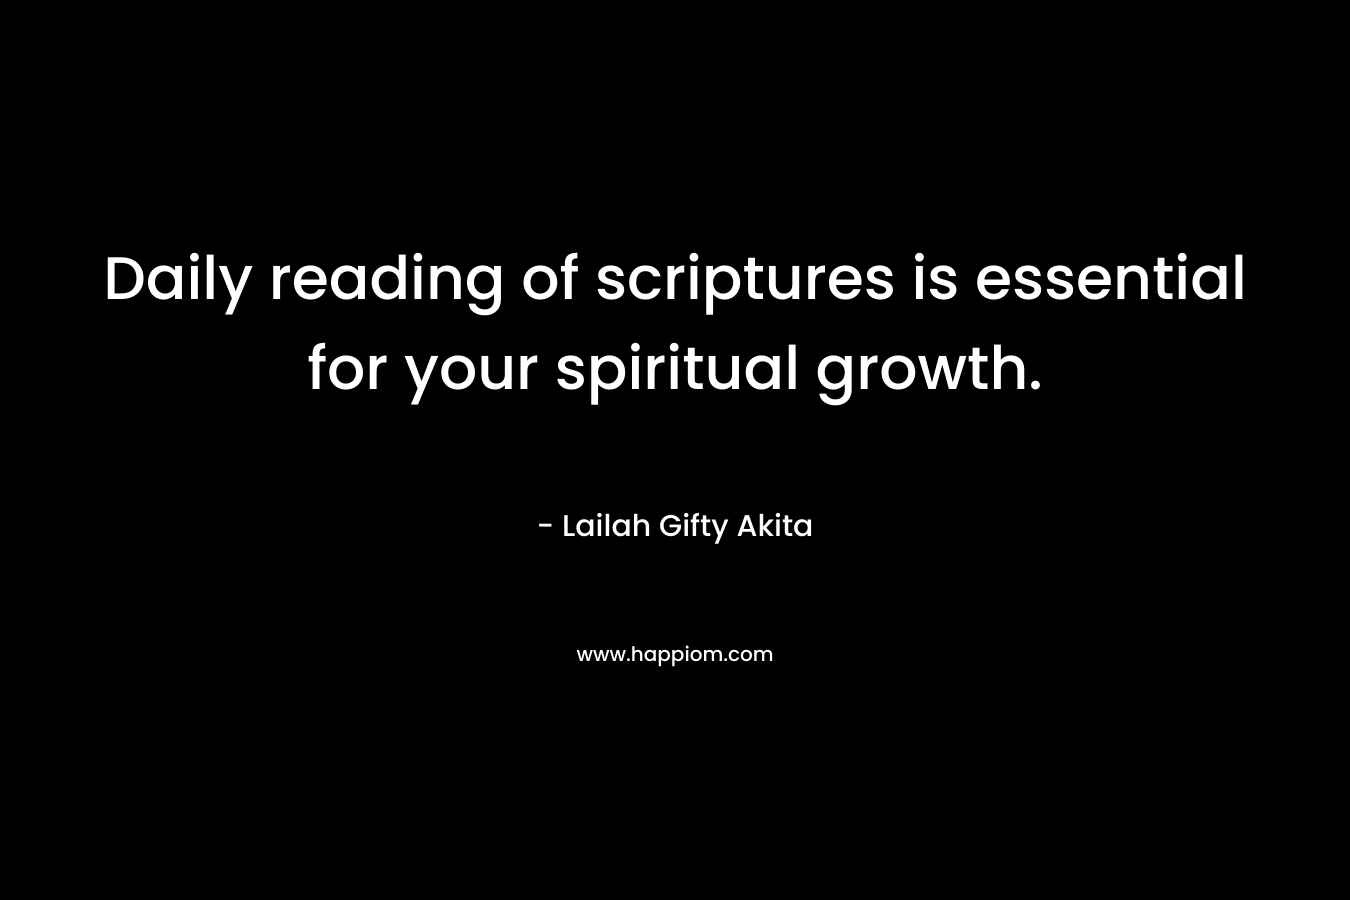 Daily reading of scriptures is essential for your spiritual growth.